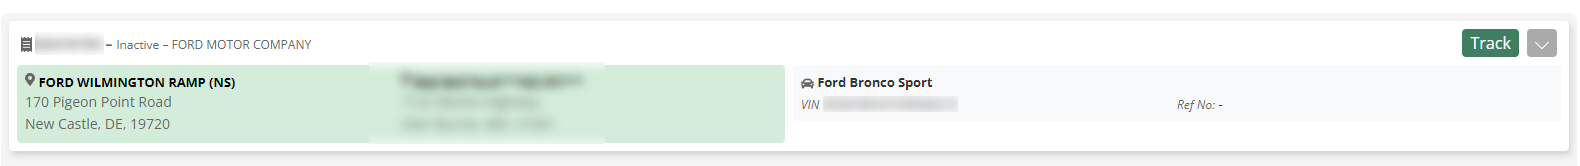 Ford Bronco Sport July 2022 Waiting Room tracker